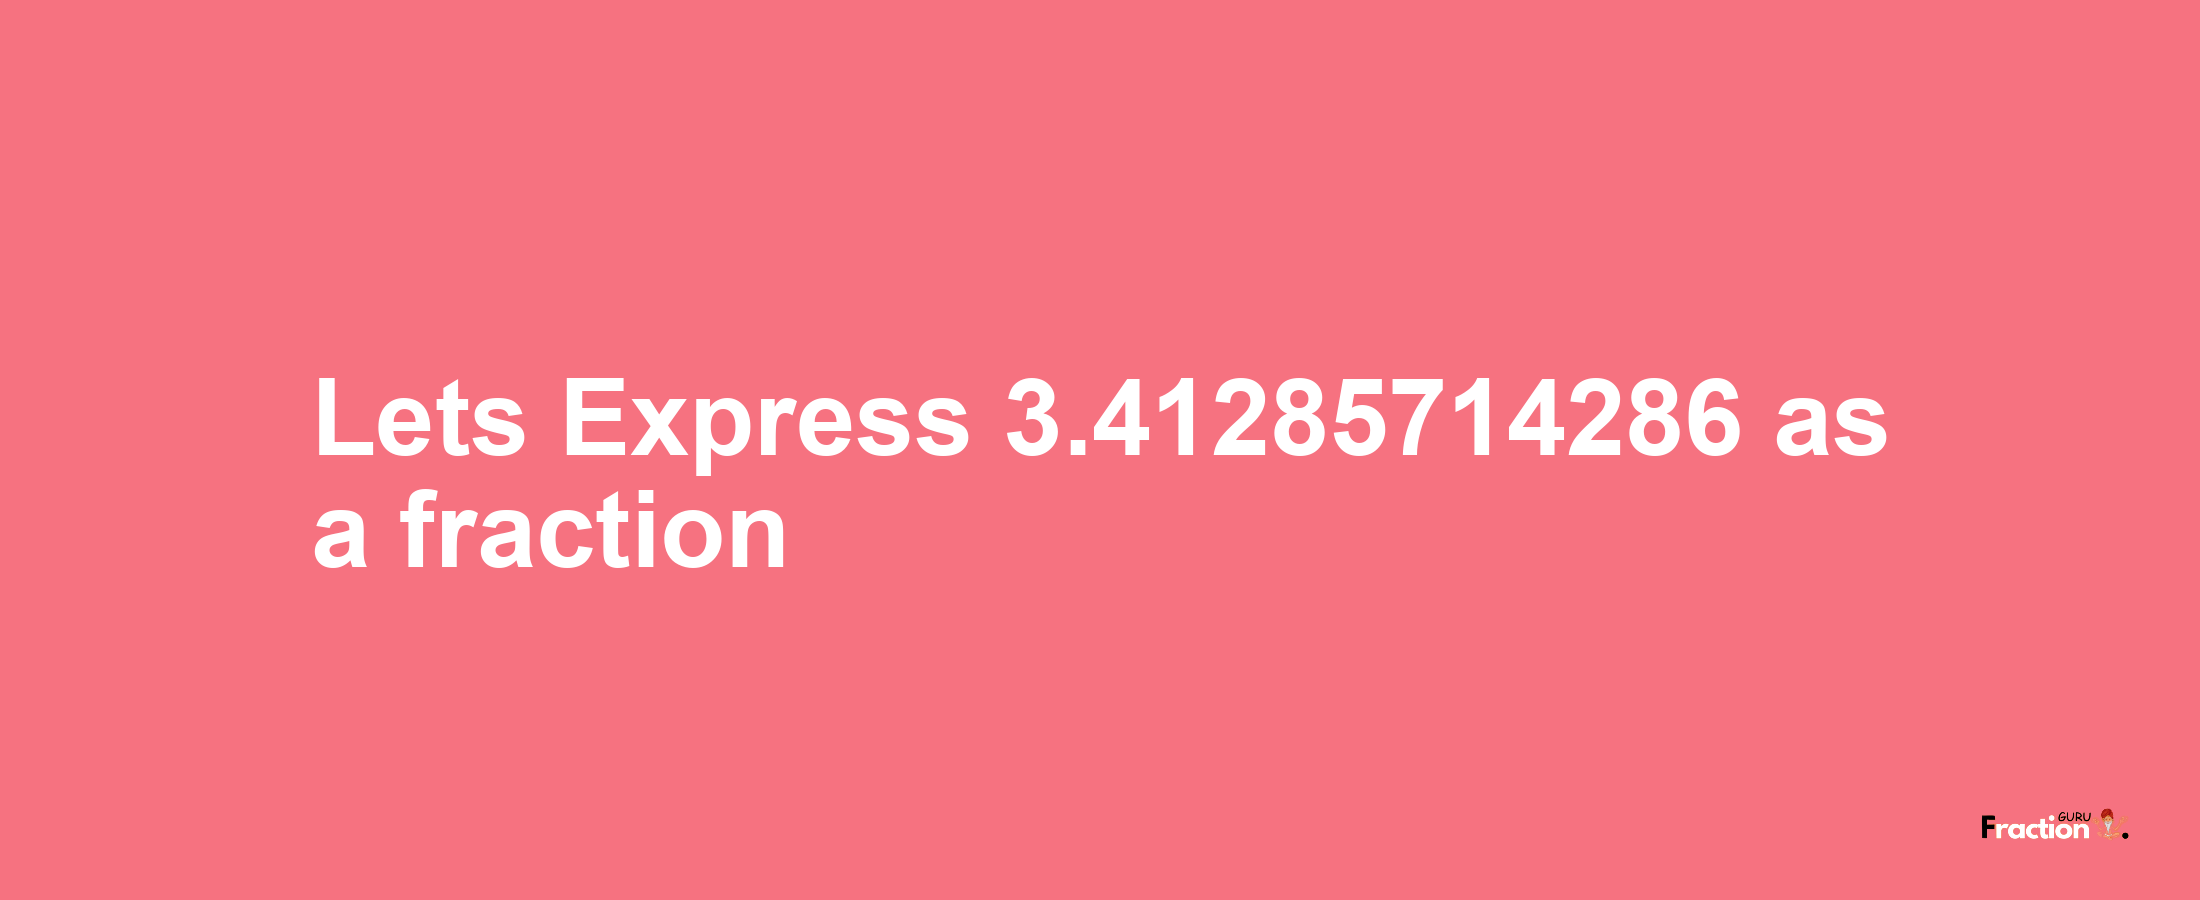 Lets Express 3.41285714286 as afraction